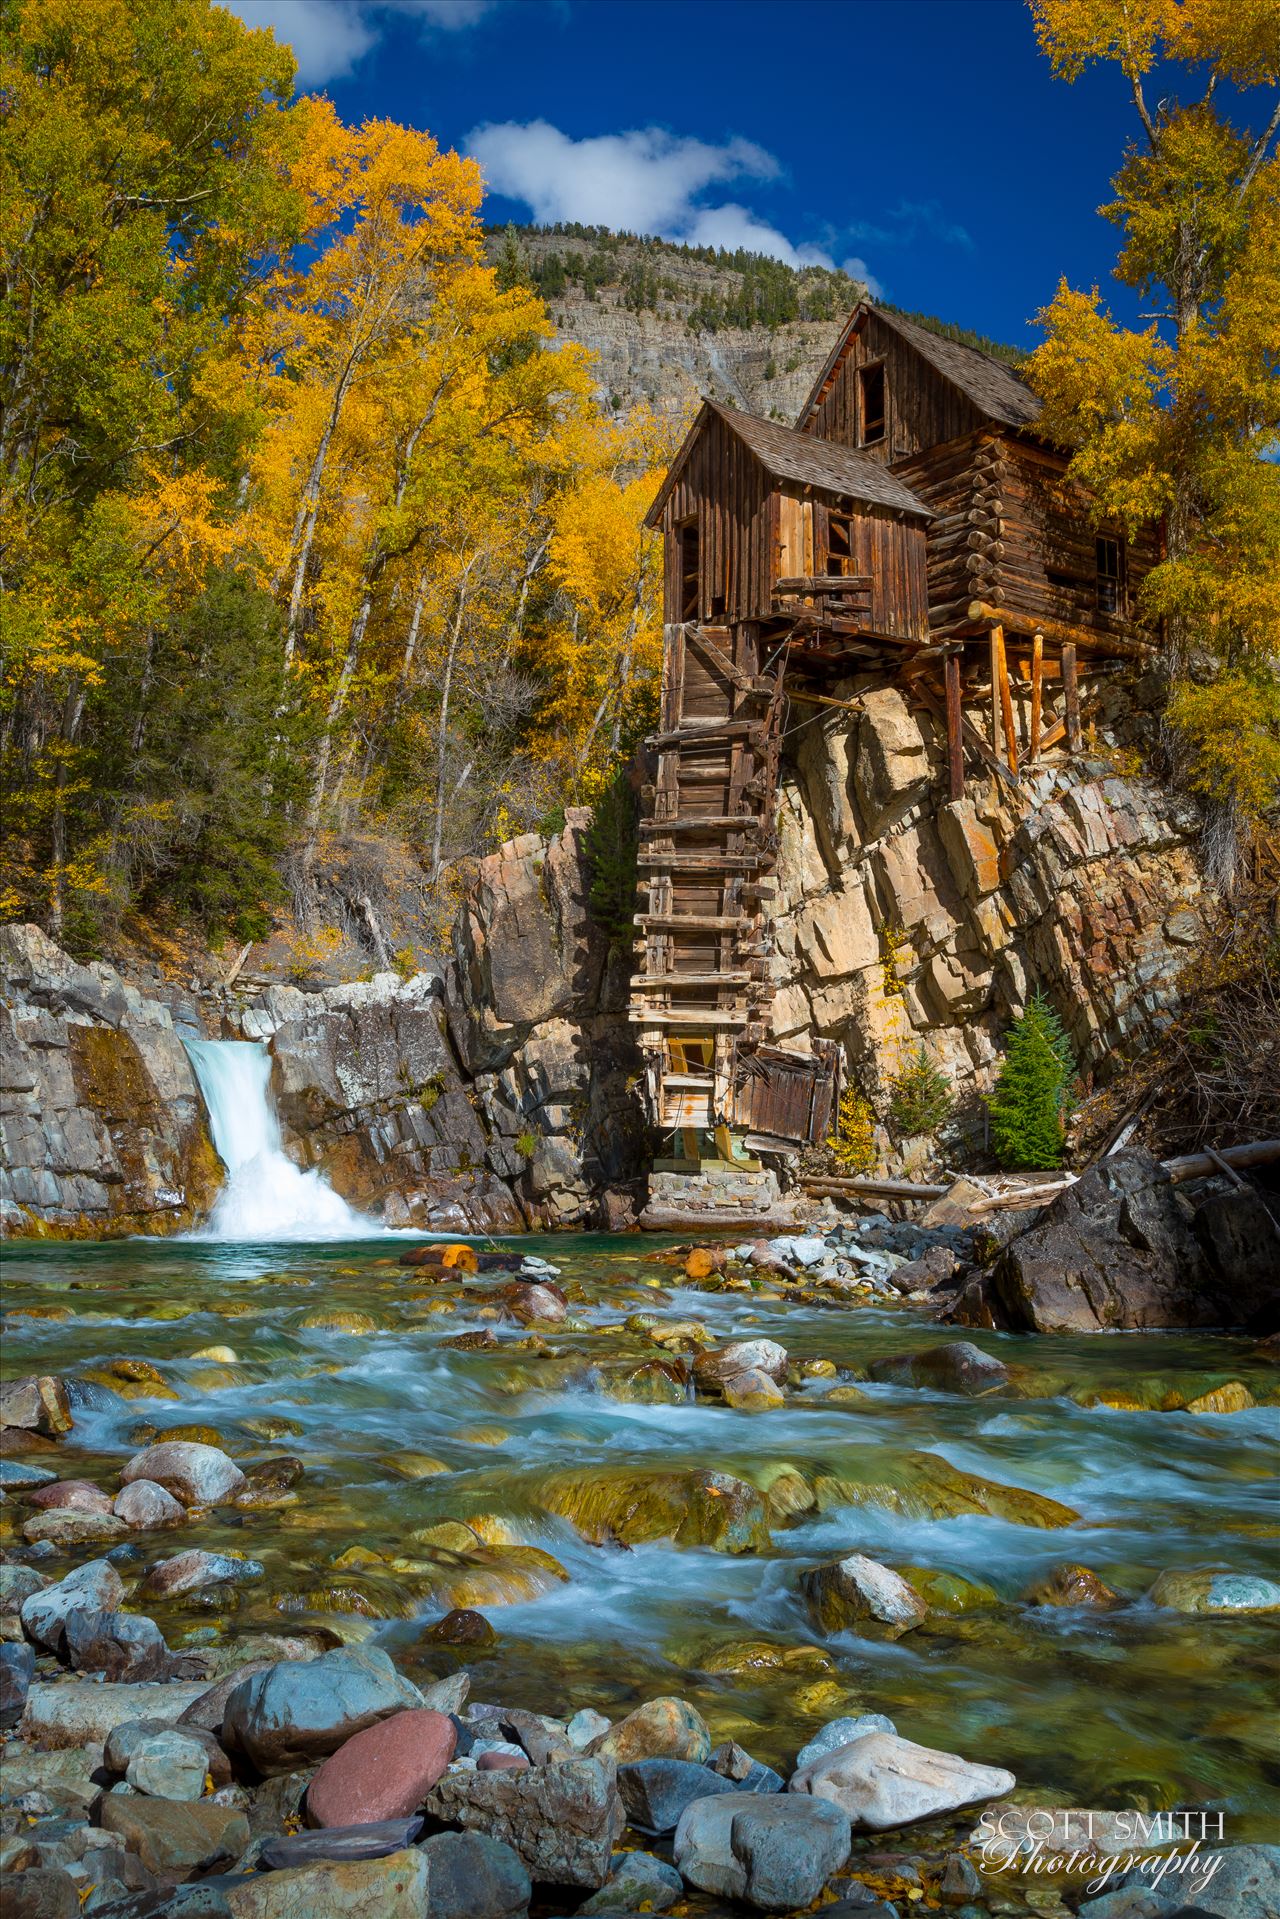 Crystal Mill, Colorado 08 - The Crystal Mill, or the Old Mill is an 1892 wooden powerhouse located on an outcrop above the Crystal River in Crystal, Colorado by Scott Smith Photos